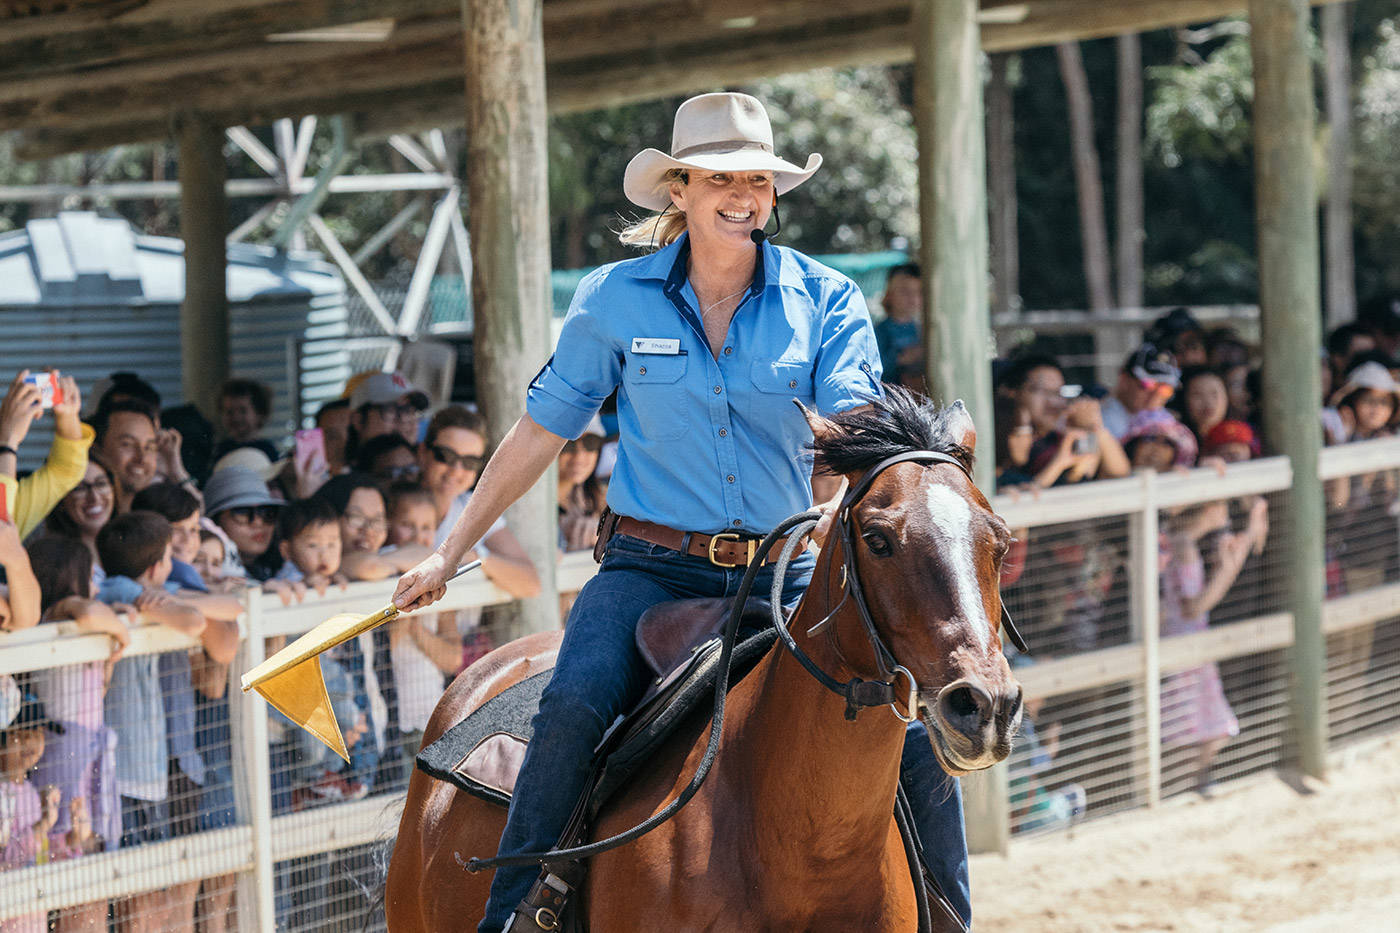 The crowd enjoying the Australian Stock Horse Show at Paradis Country Gold Coast - KKDay Top 15 Family Attractions in Brisbane, Gold Coast, and Cairns to Experience This Year